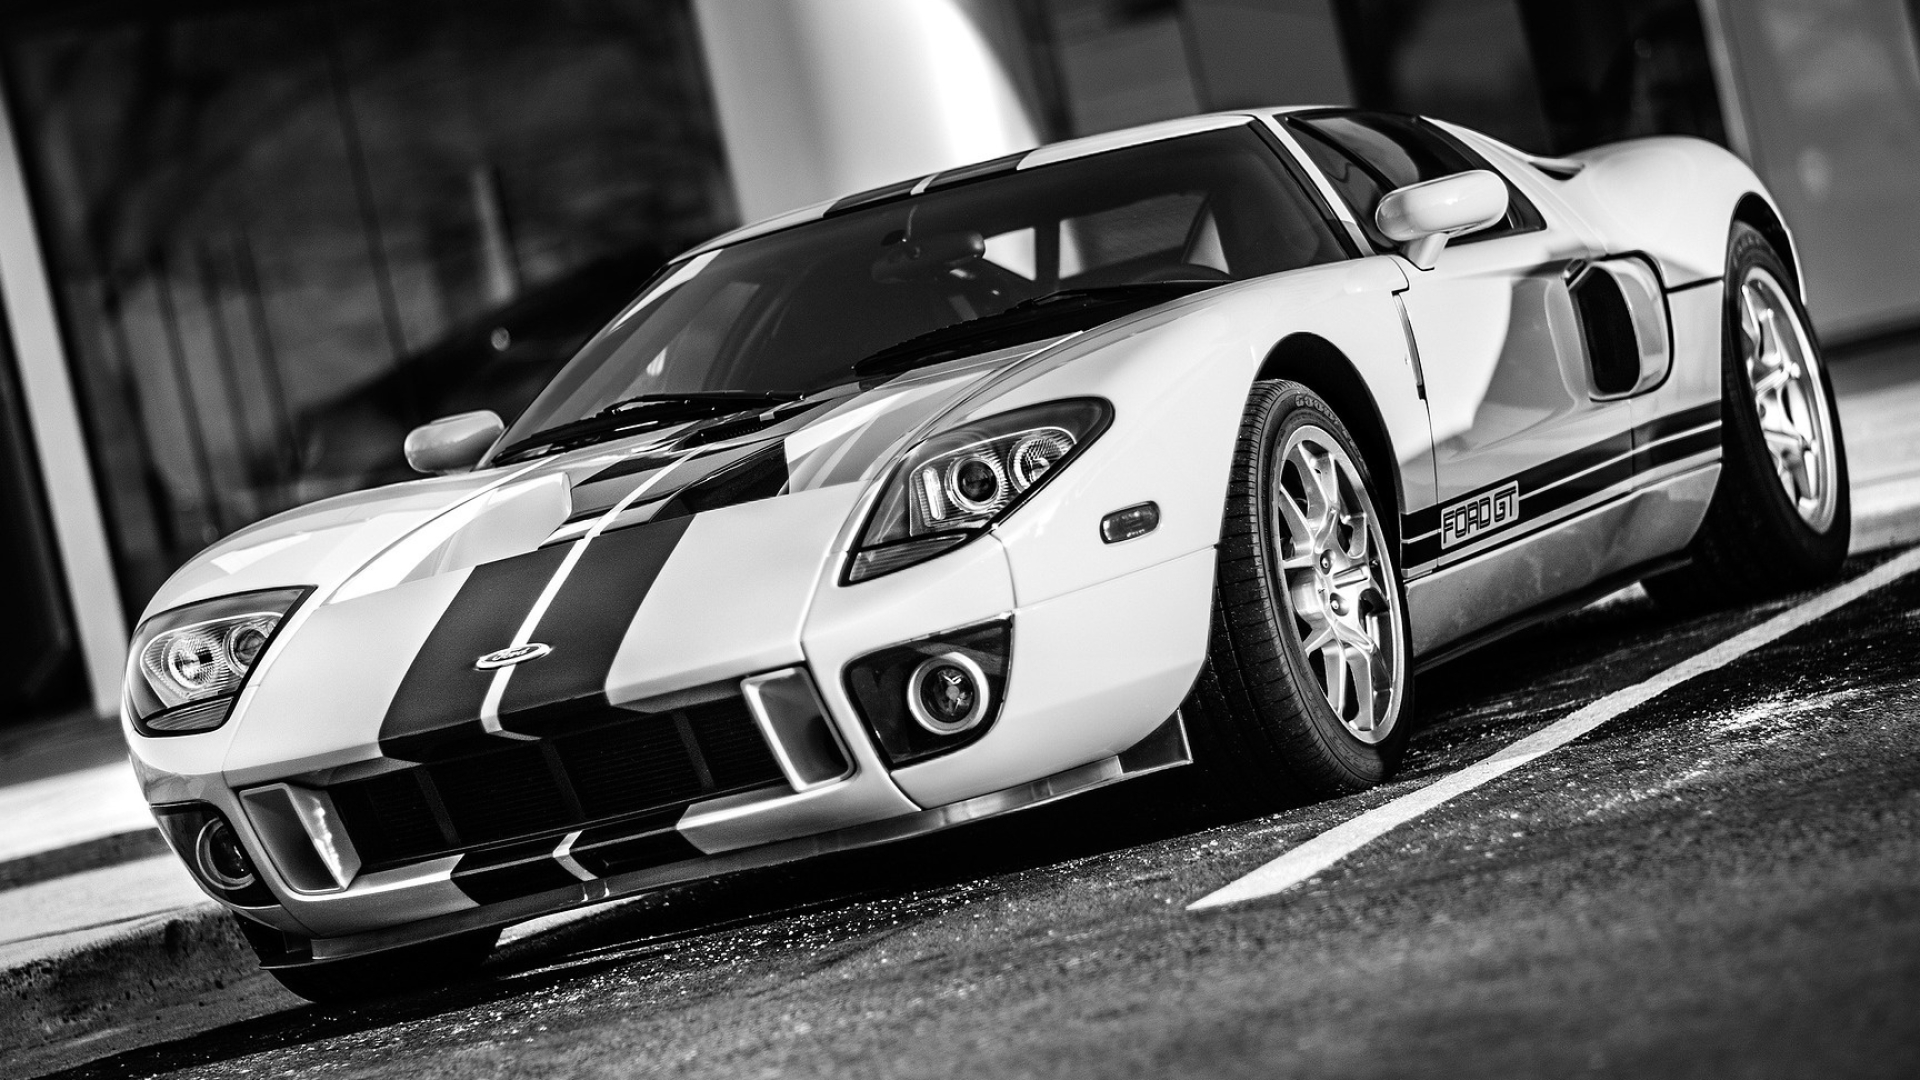 Sports Car: Ford GT, Well-balanced weight distribution. 1920x1080 Full HD Background.